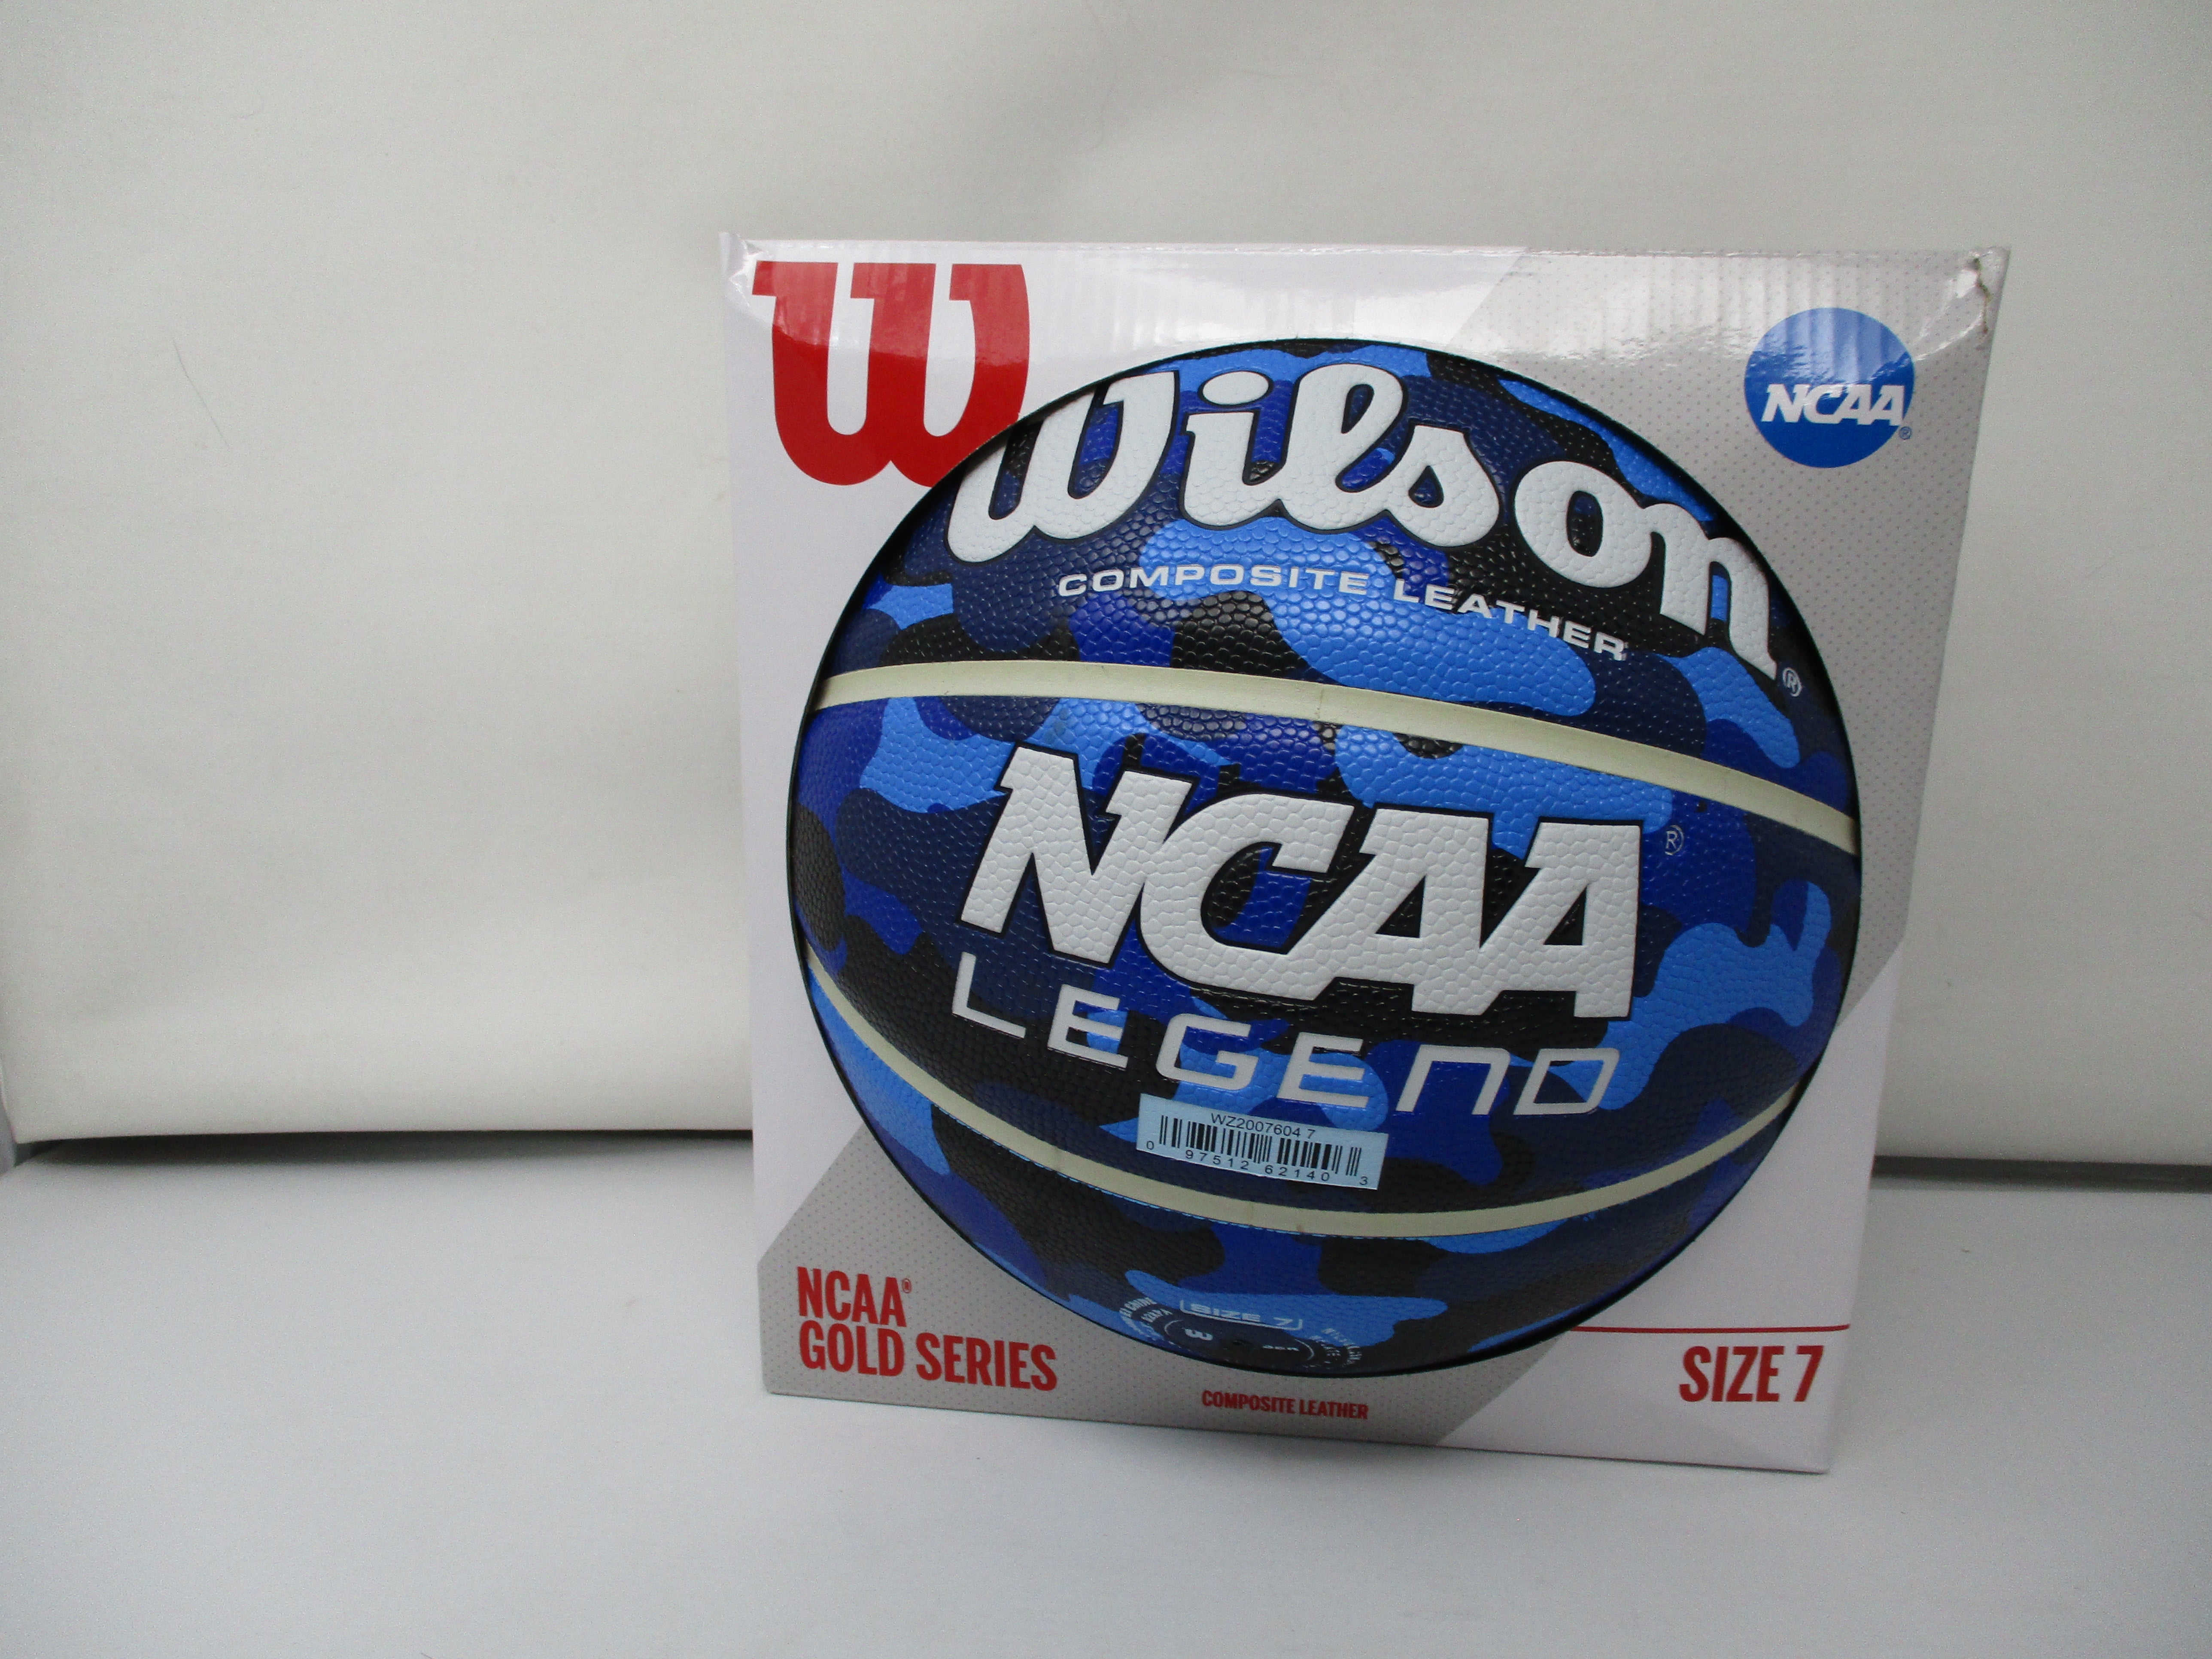 Leather, Rubber, and Nylon: How Wilson Makes NBA Basketballs